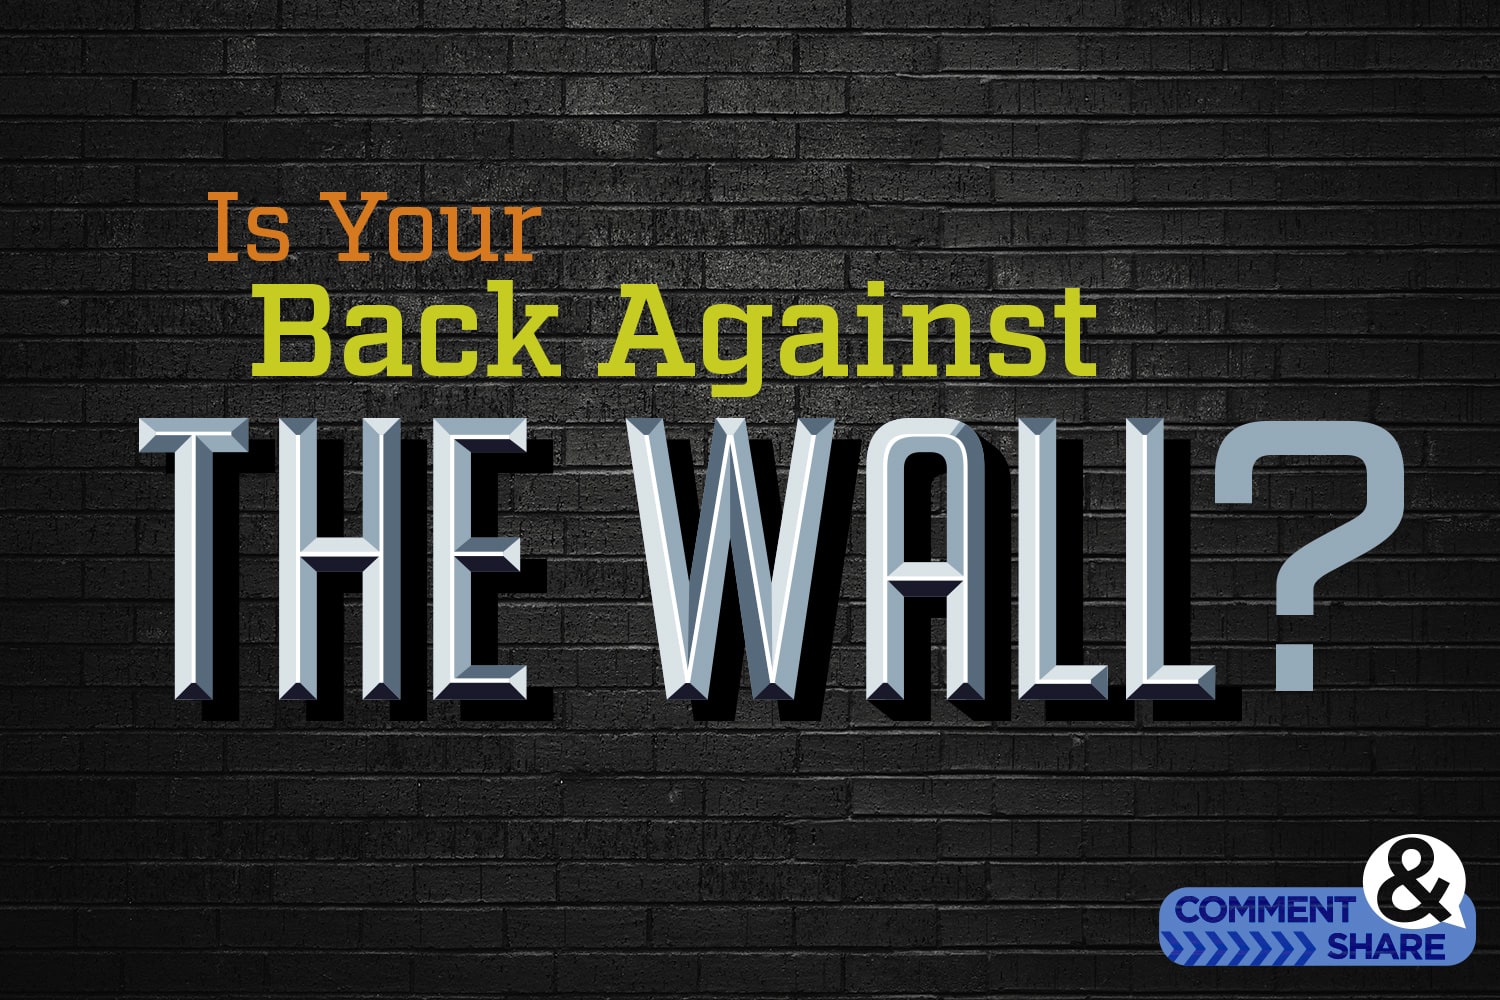 Is Your Back Against the Wall?